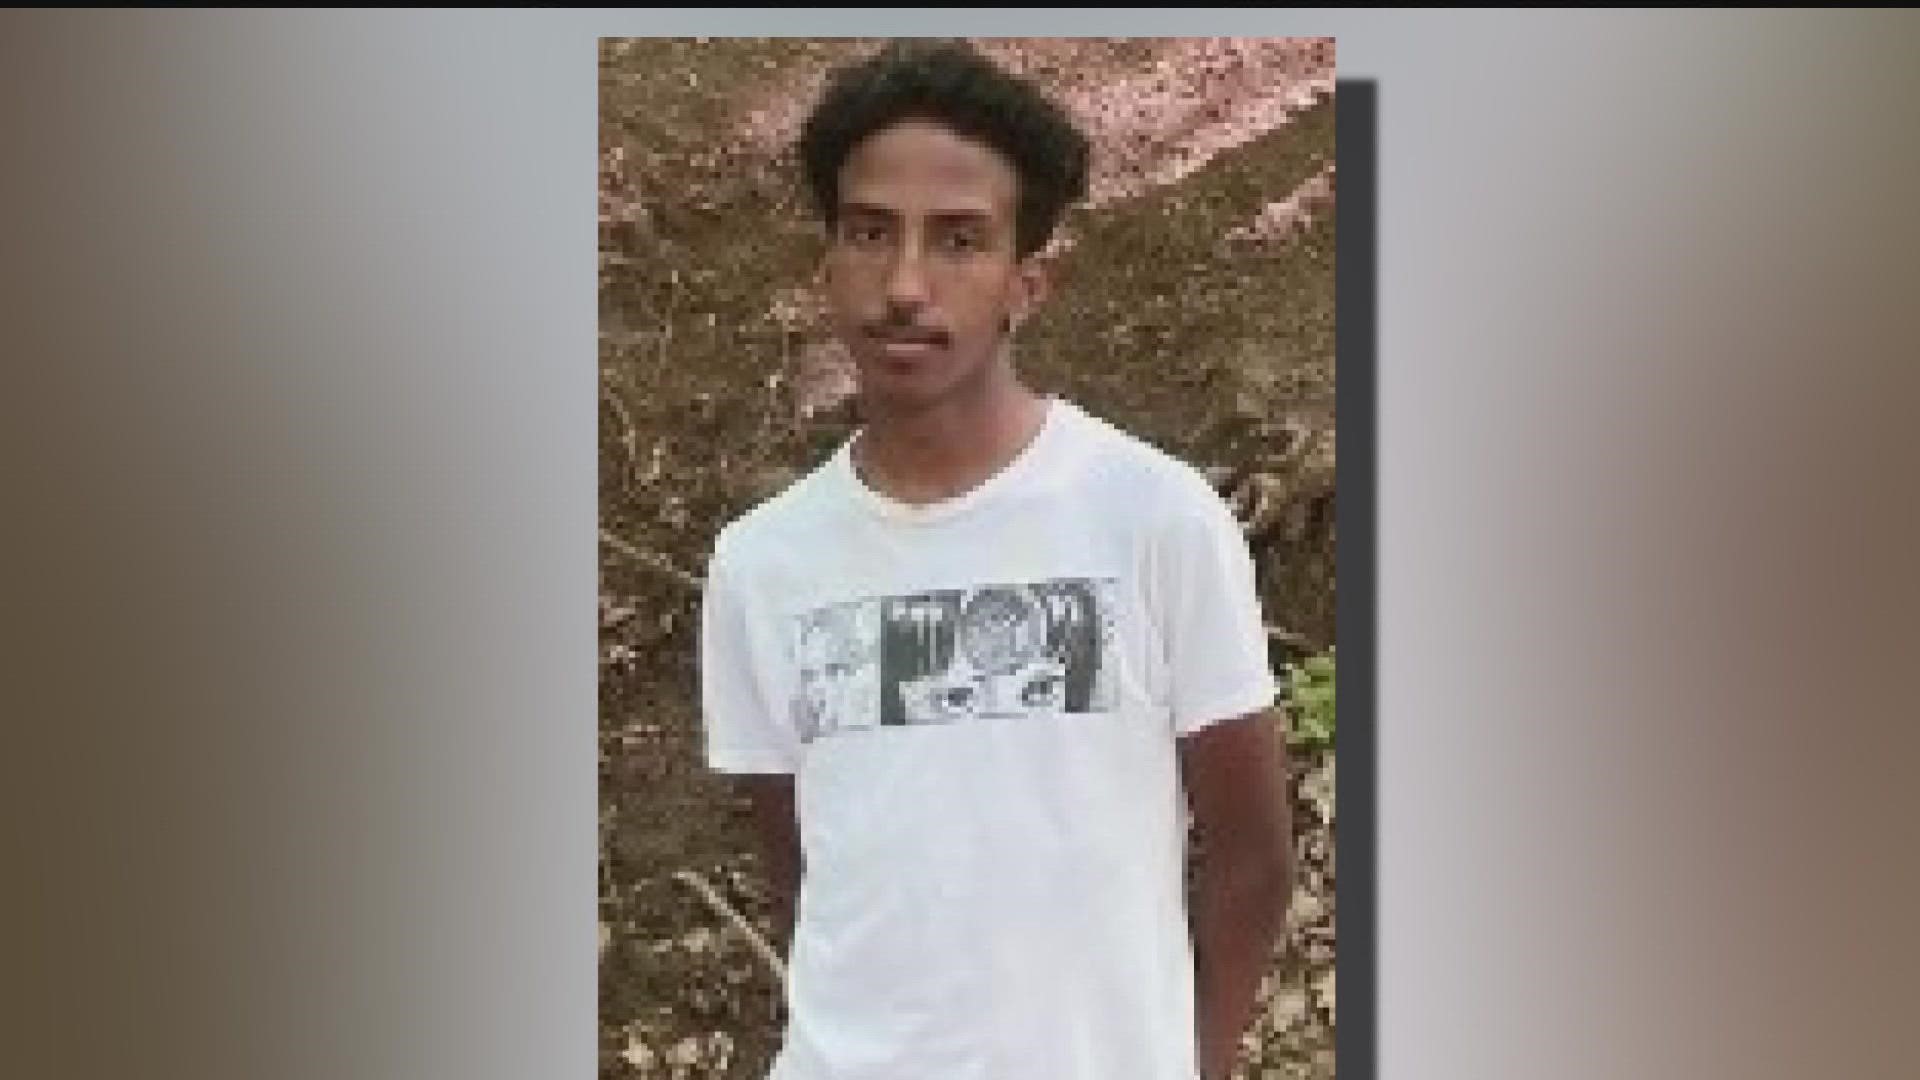 Abdi Ali, 21, has been missing since early Wednesday morning and now his friends and family are asking for help finding him.